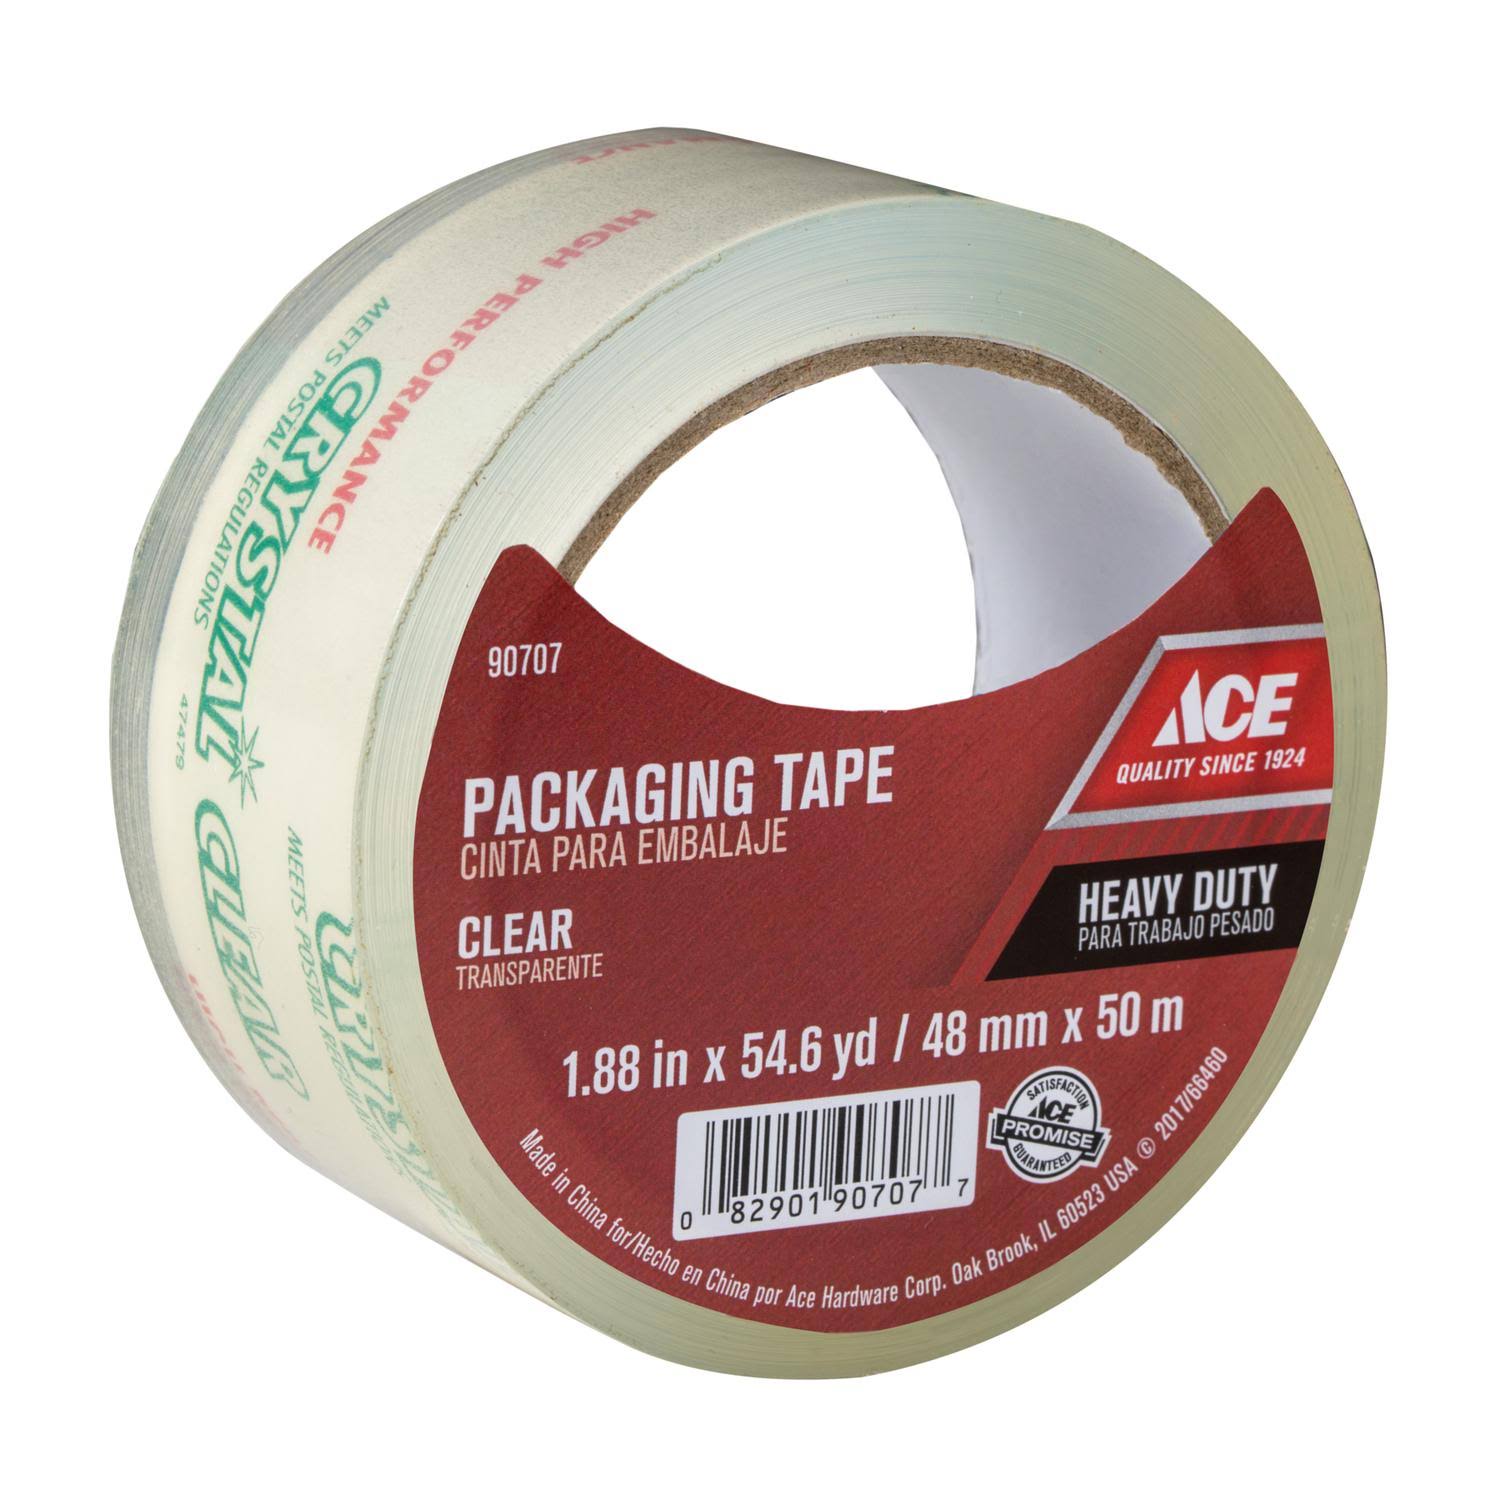 Ace Carton Sealing Tape, Clear, 54.6 yd